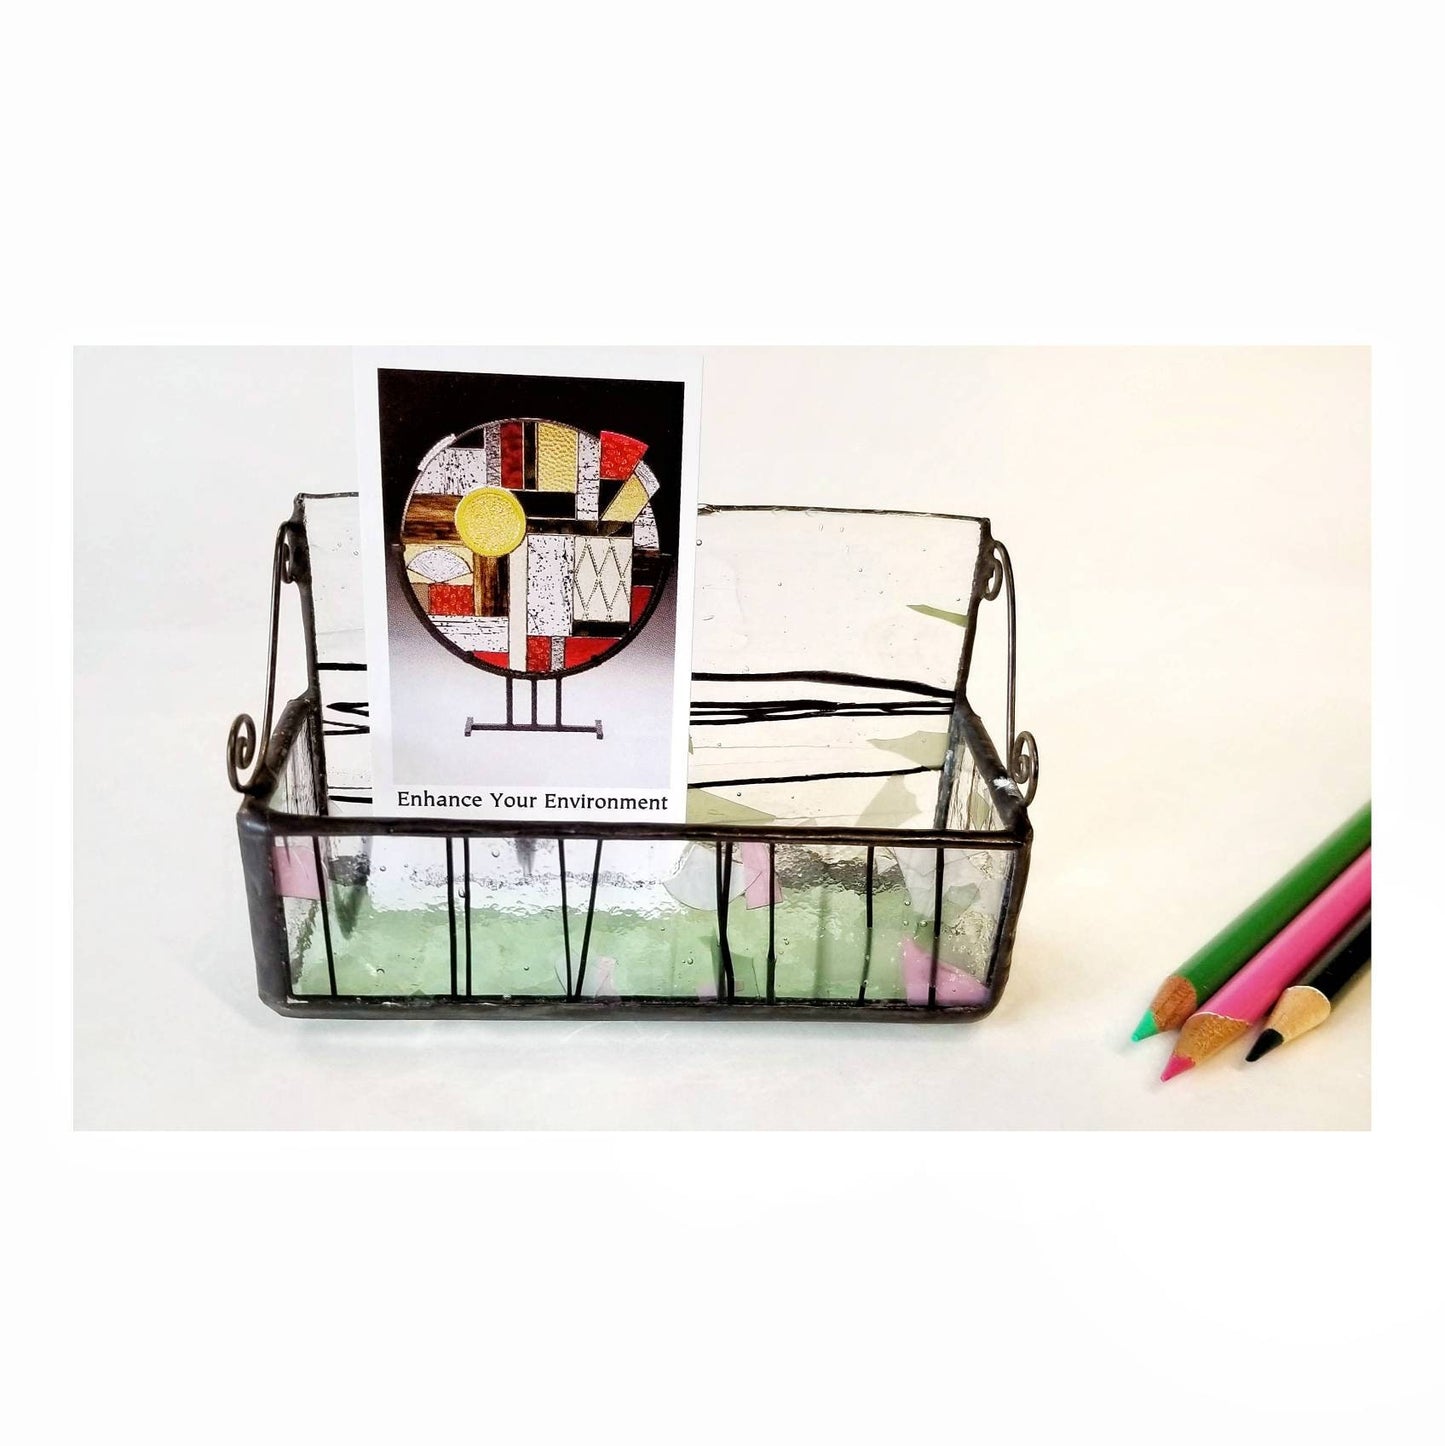 Business card holder Stained glass trinket box Pink & Green confetti w/Black stripes  Display for notes, office organization desk accessory